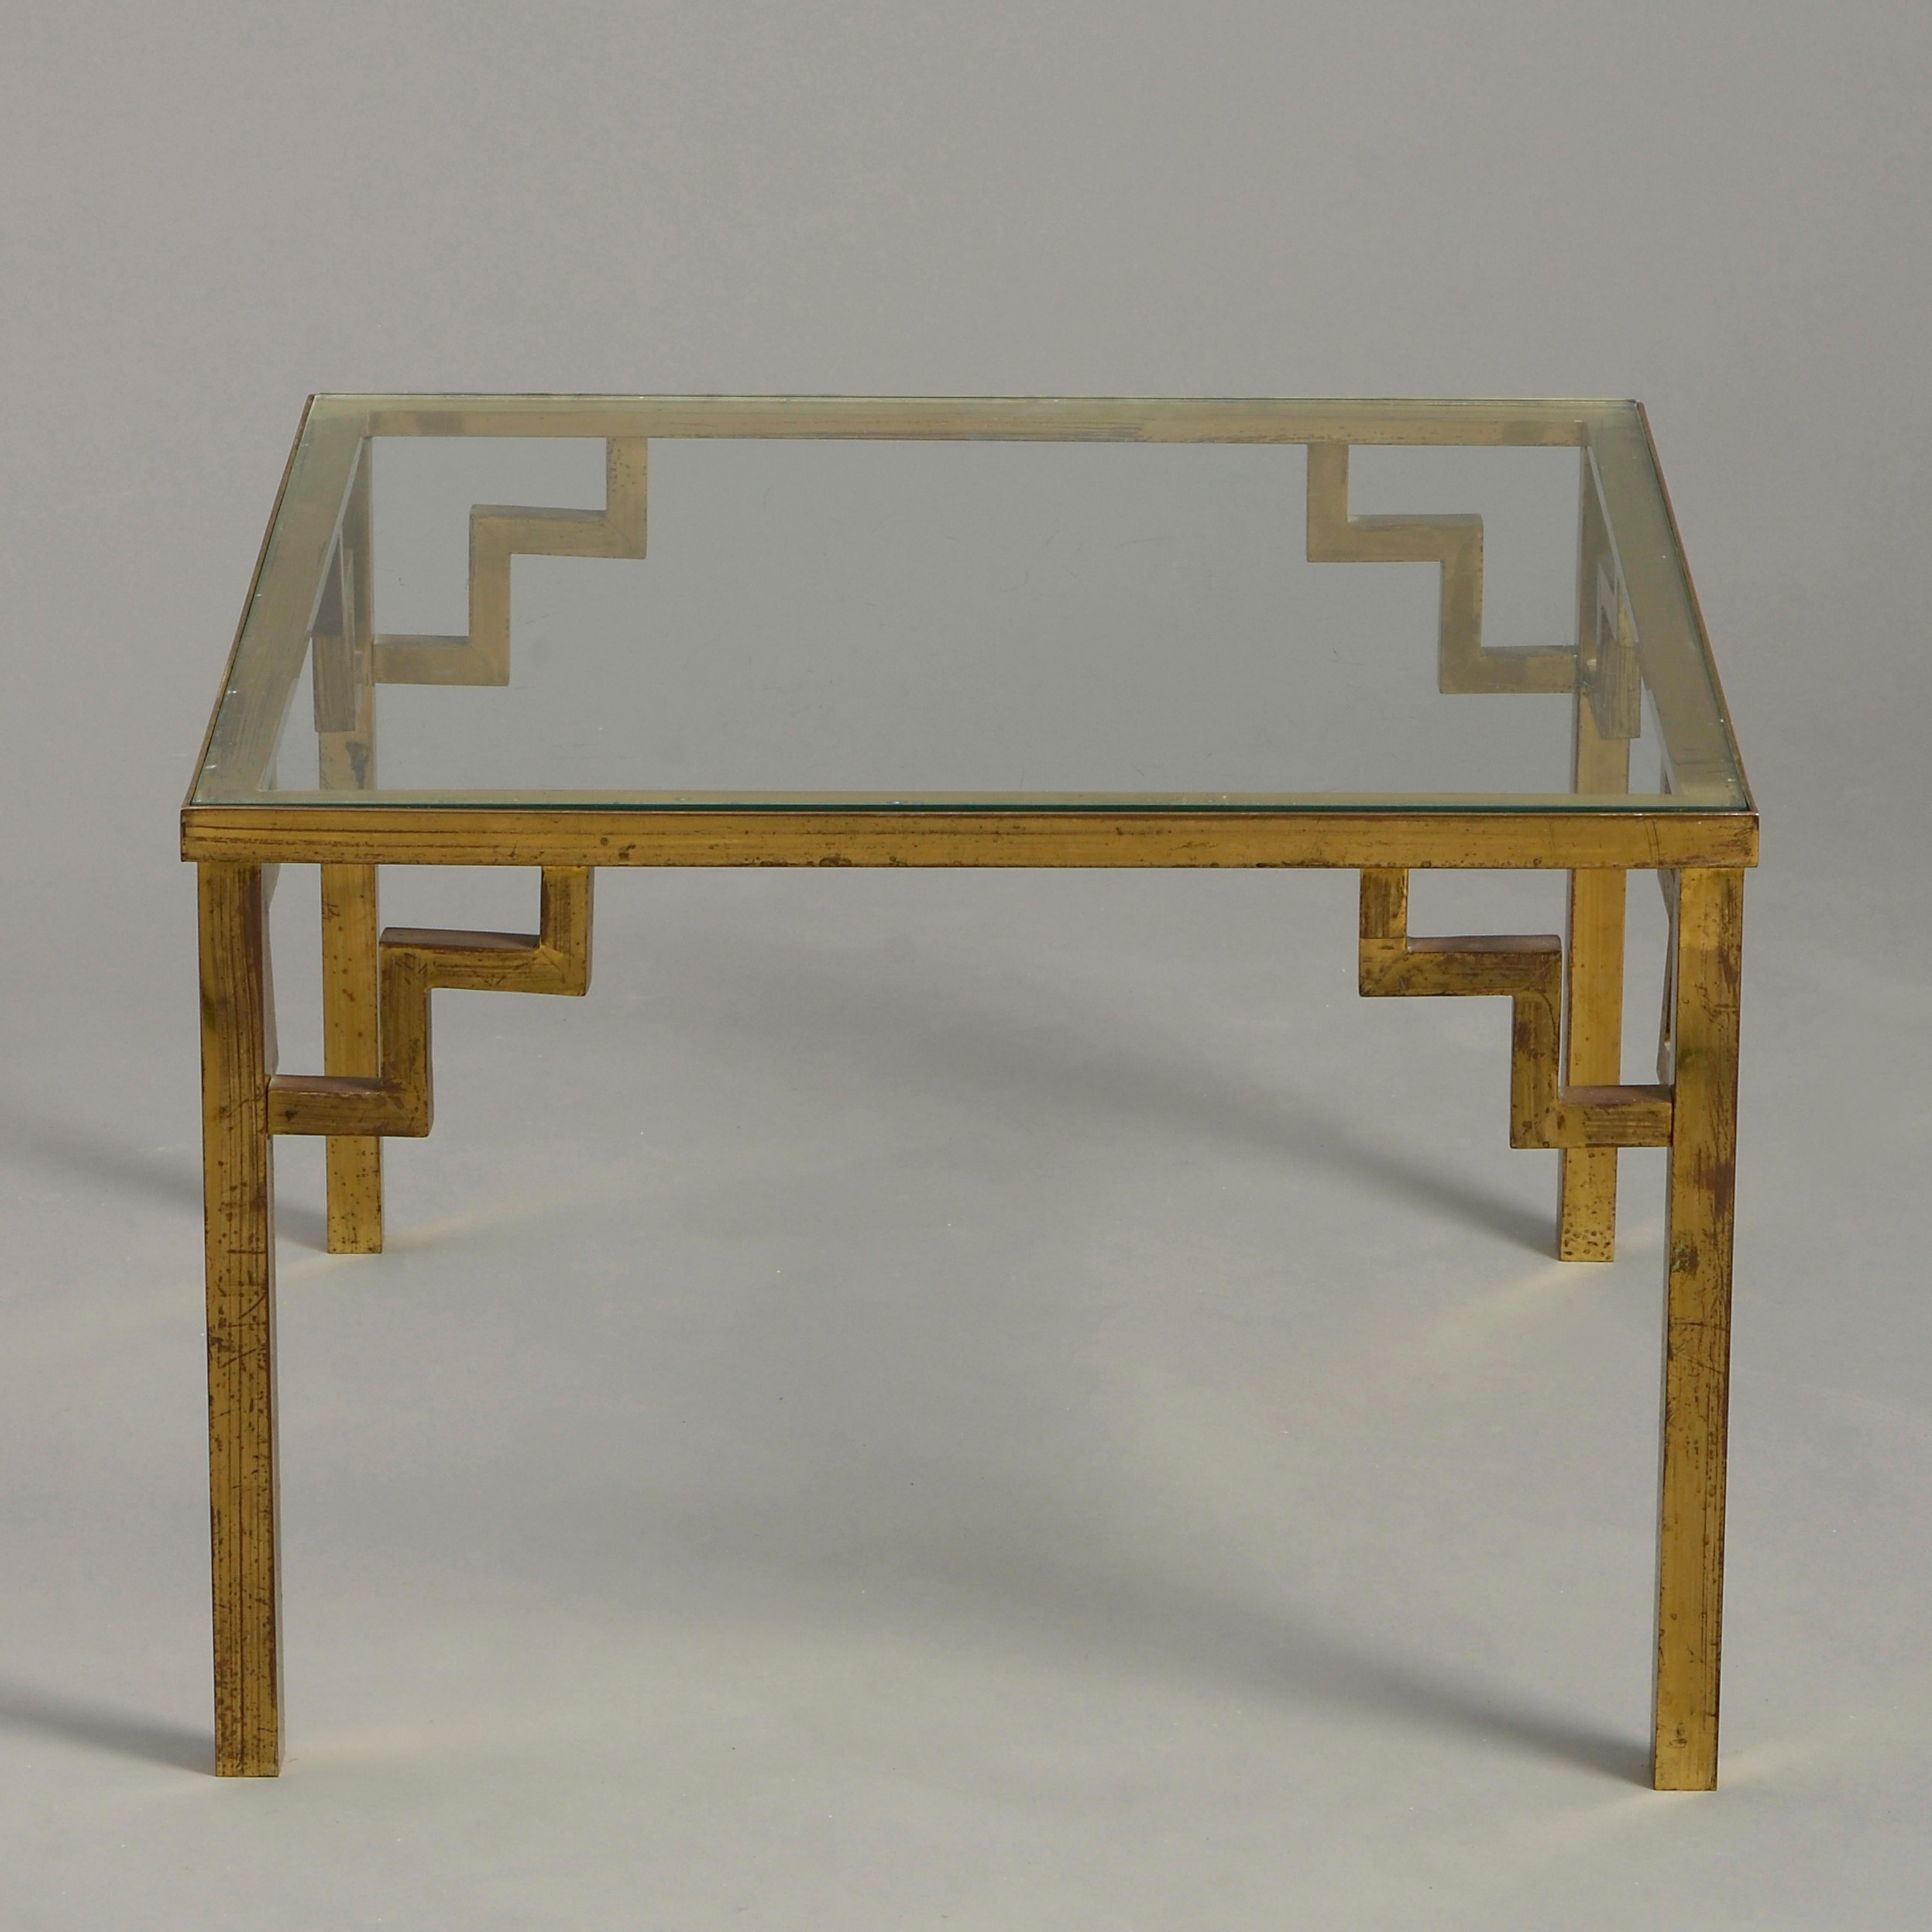 A mid-20th century low table or coffee table of square form, the glass top set within a frame supported by square legs headed by pierced brackets.